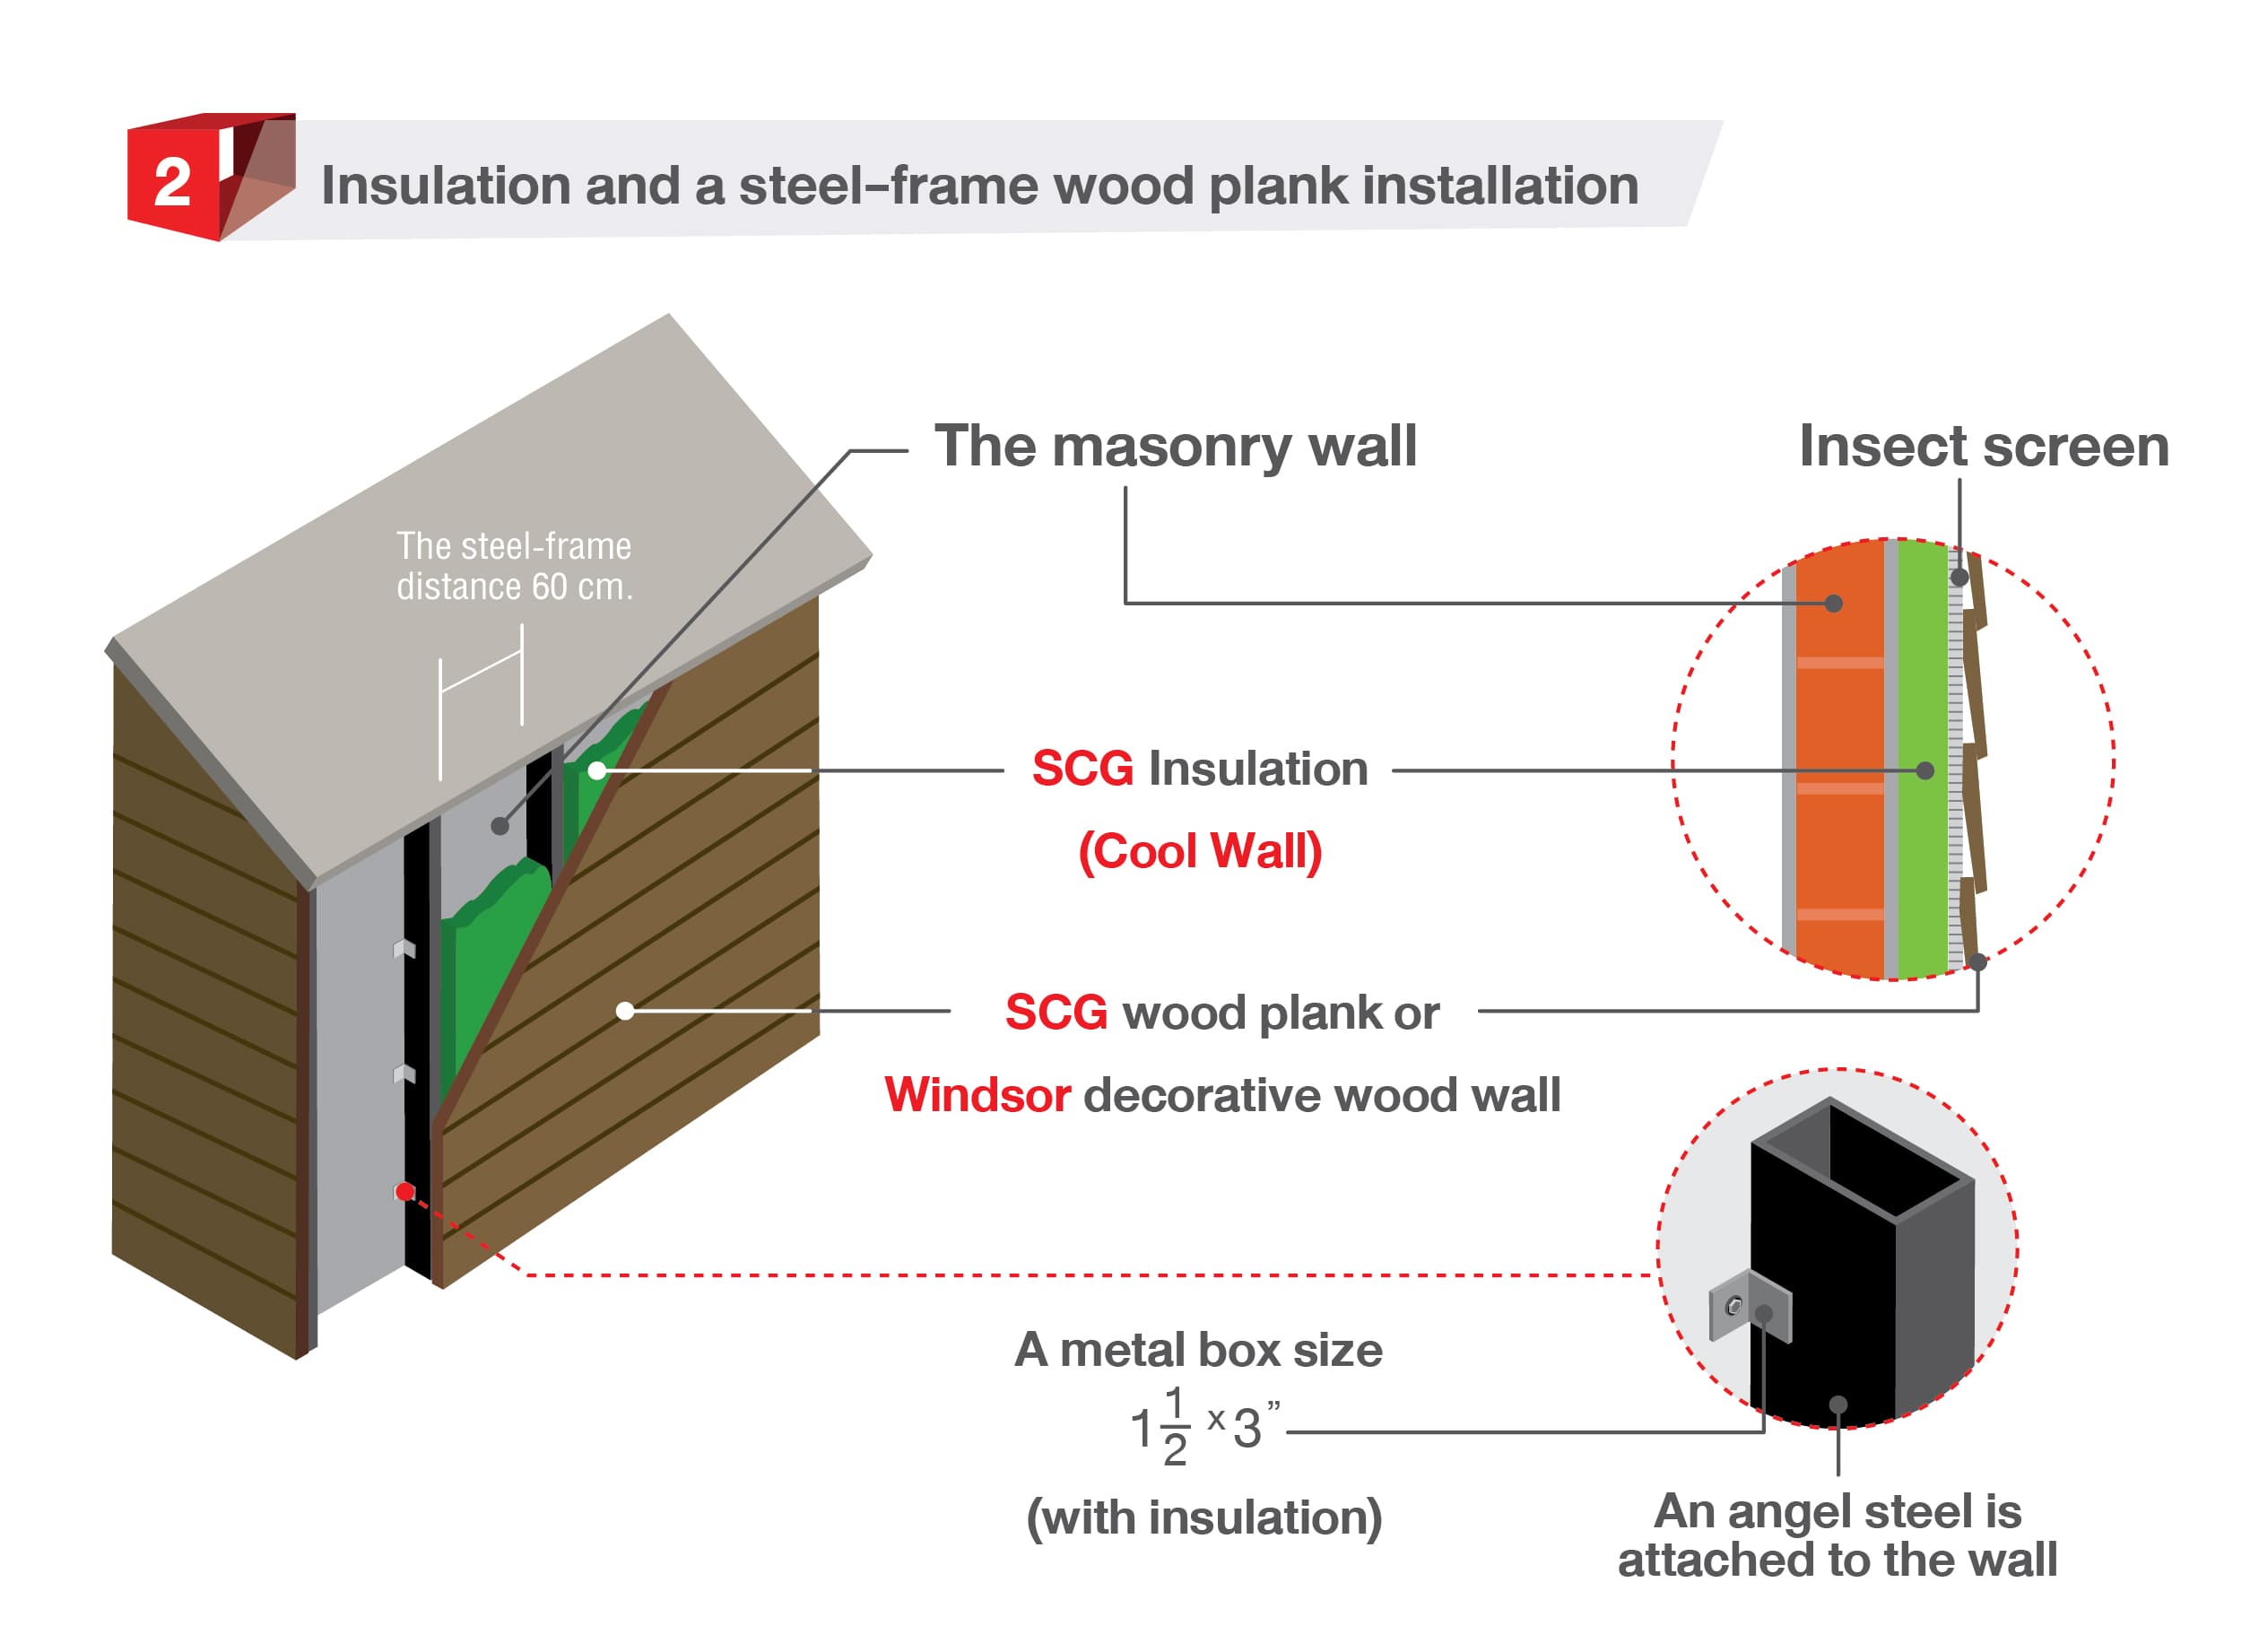 How to keep house cool with wood plank - How to install wall insulation